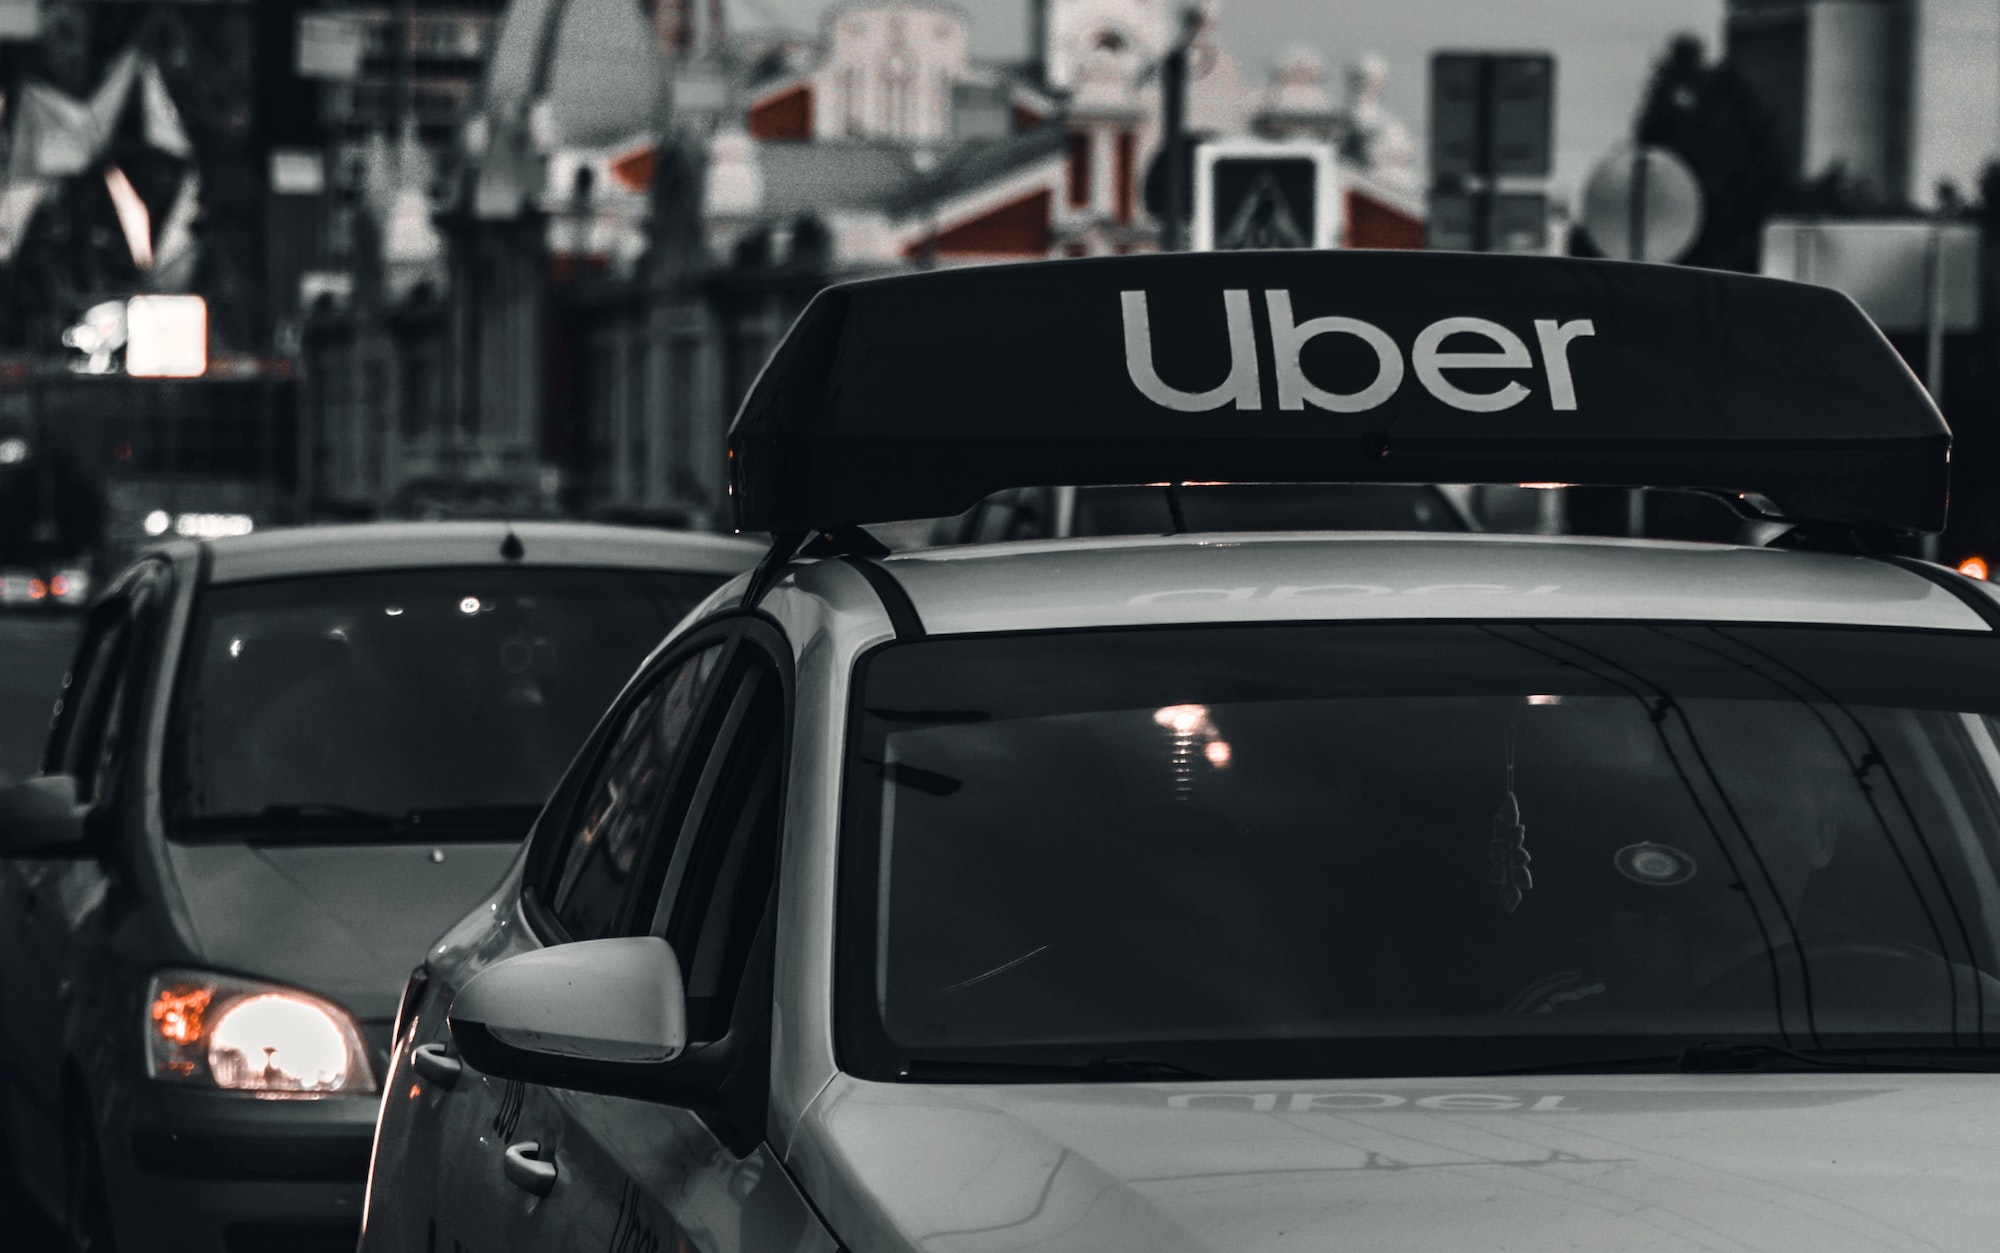 Uber agrees to pay £615m tax bill